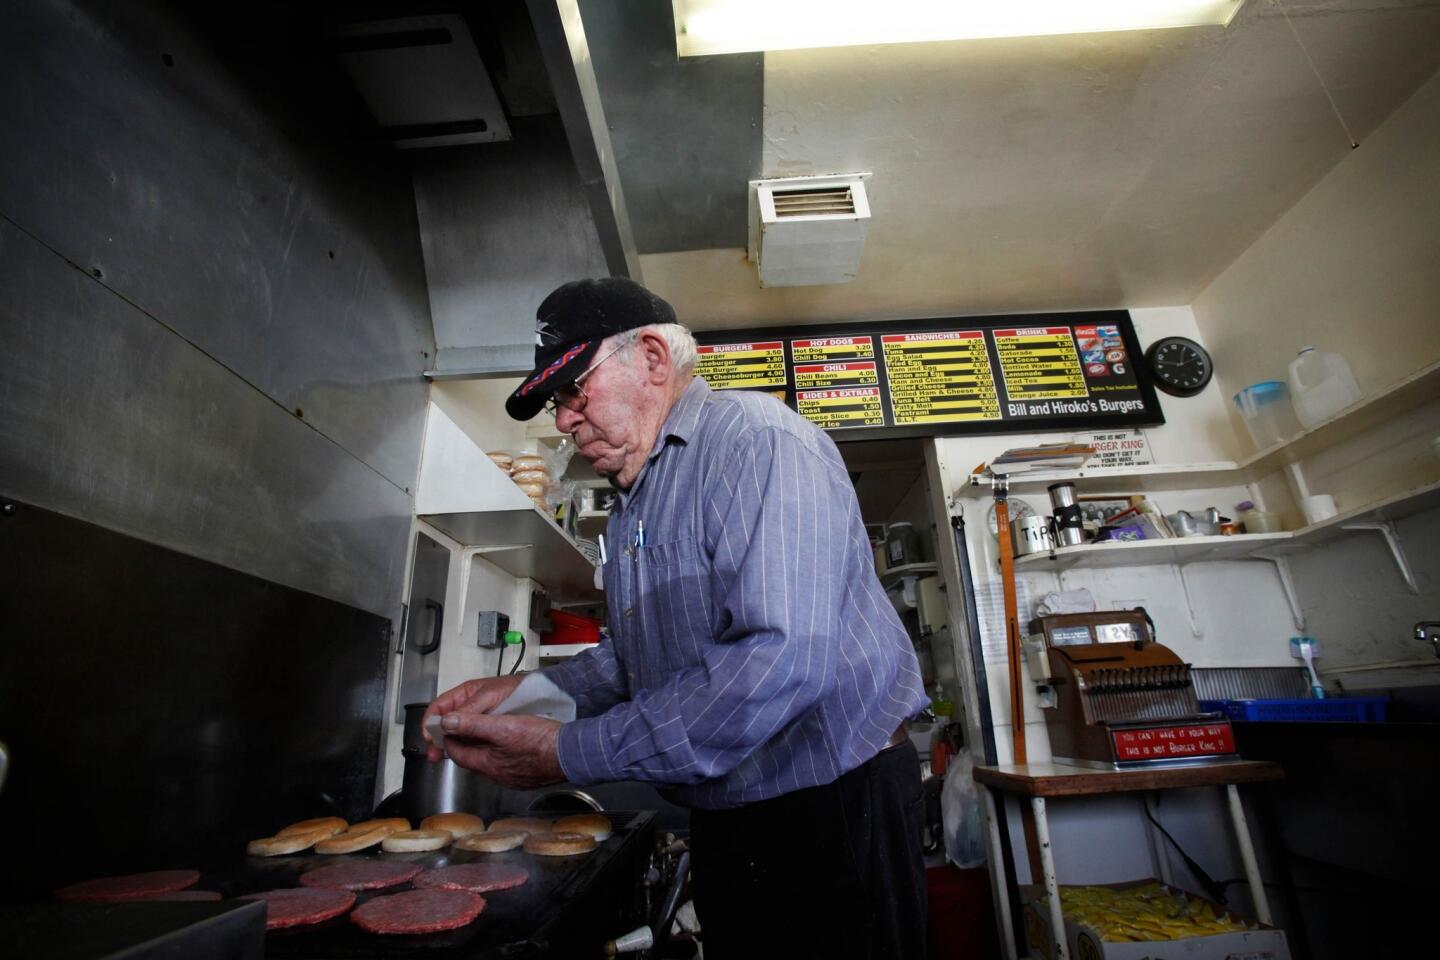 Bill Elwell, 87, doesn't want any more customers, but they just keep showing up at his tiny burger shack where Van Nuys meets Sherman Oaks. A sign above the cash register says, "This isn't Burger King. You can't have it your way."